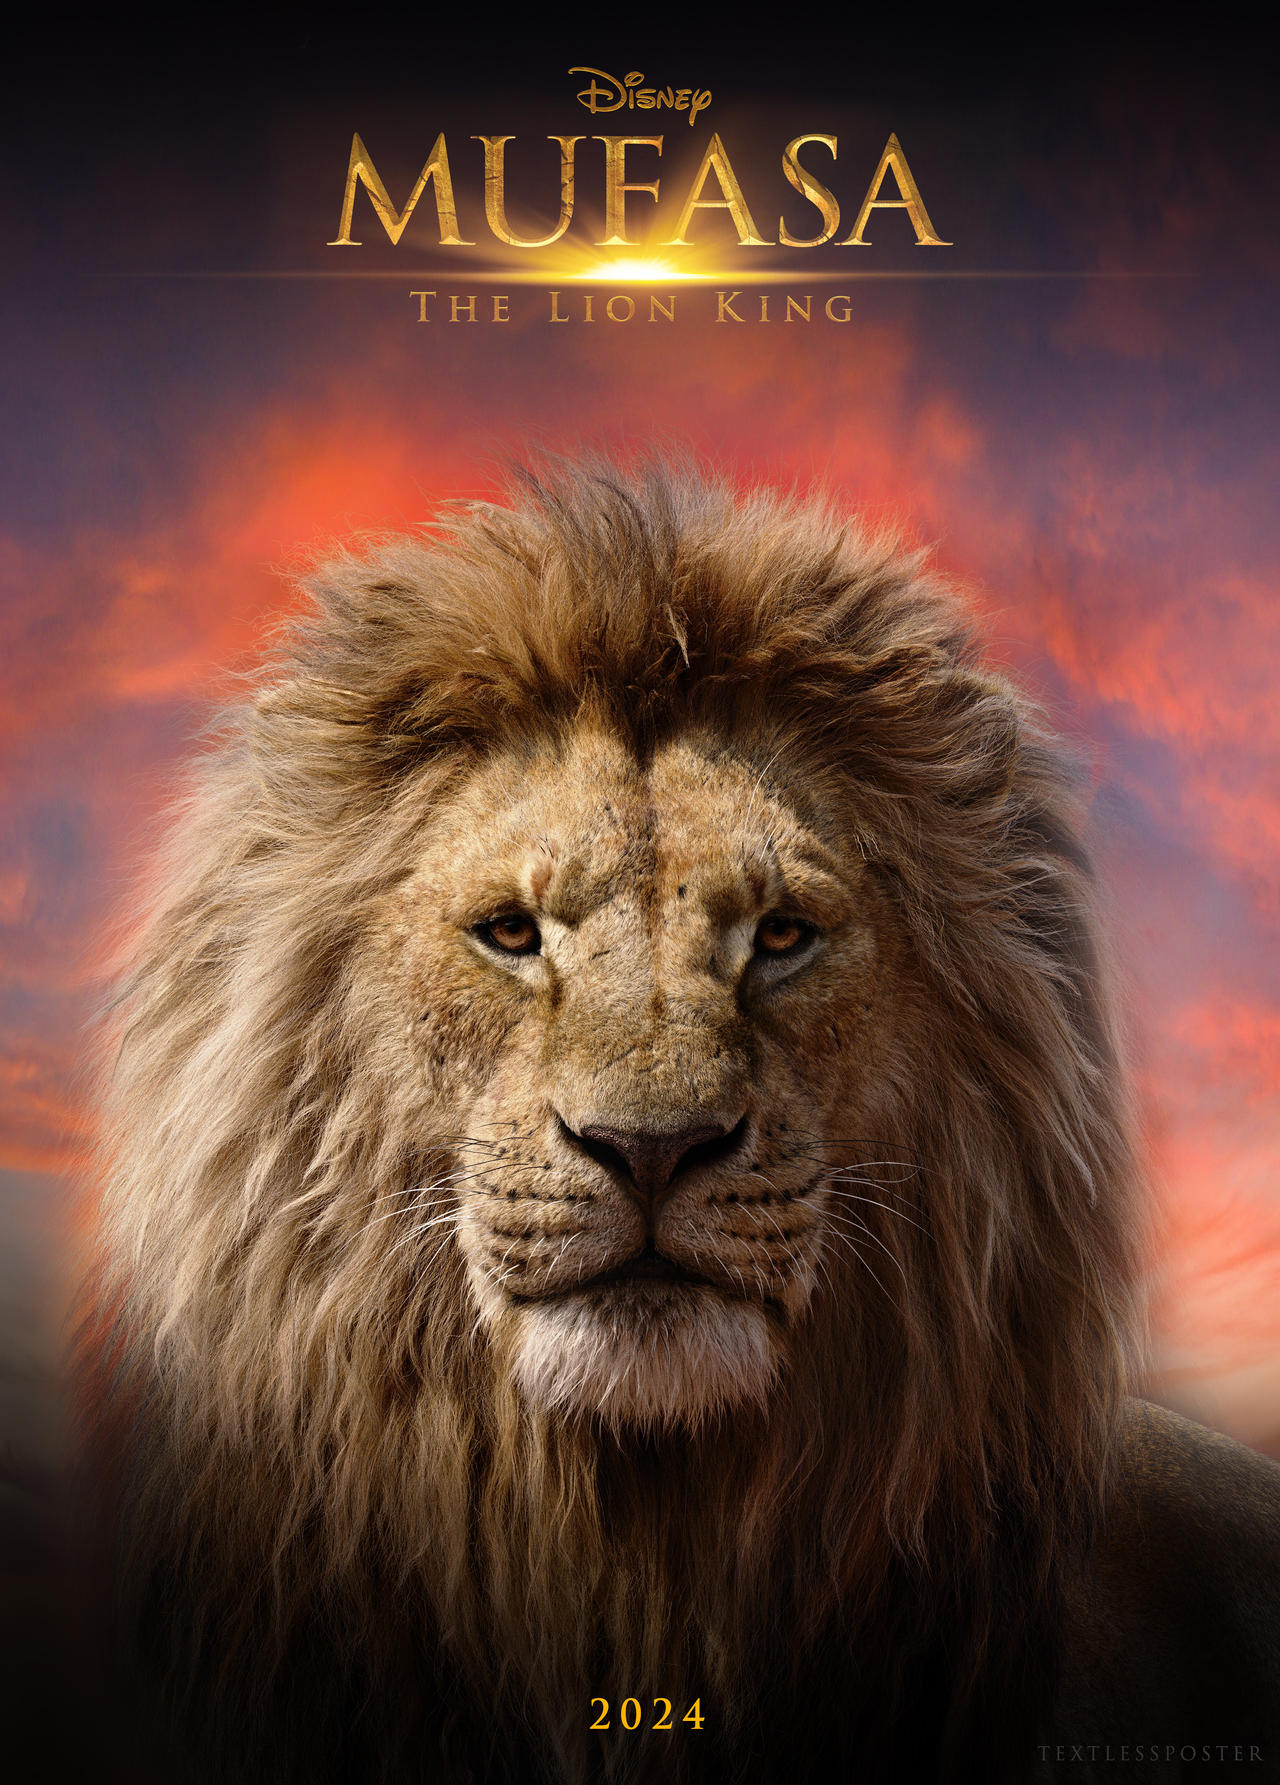 Mufasa: The Lion King Movie Review